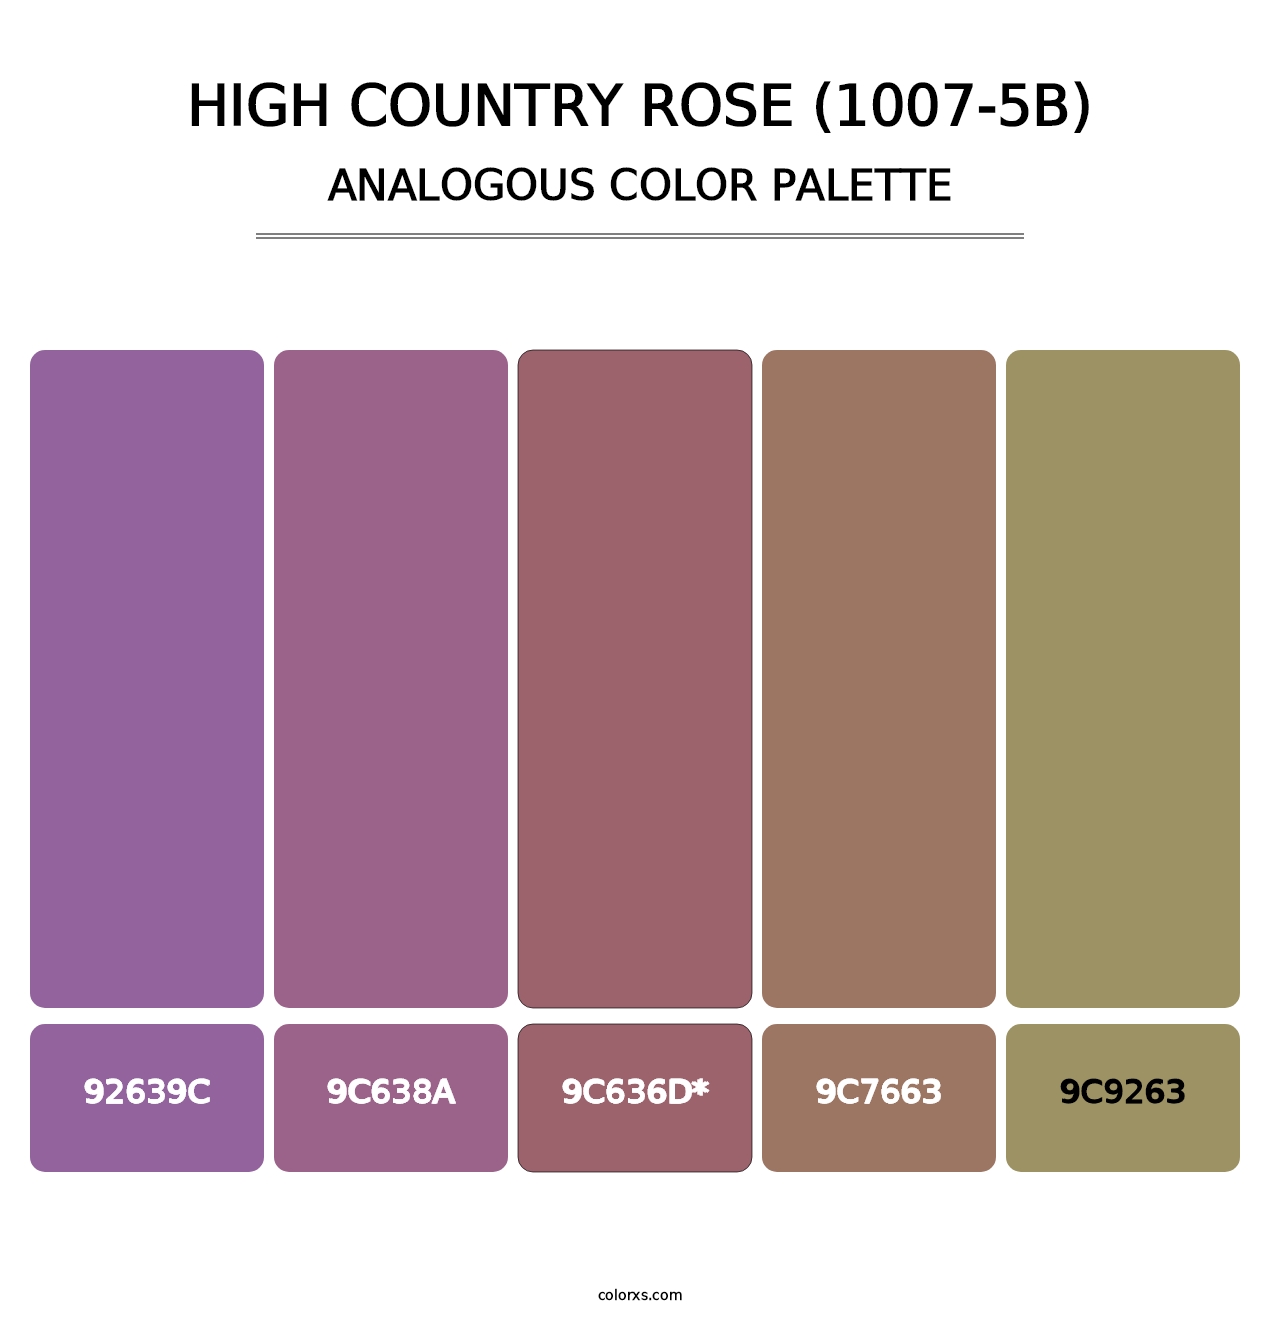 High Country Rose (1007-5B) - Analogous Color Palette